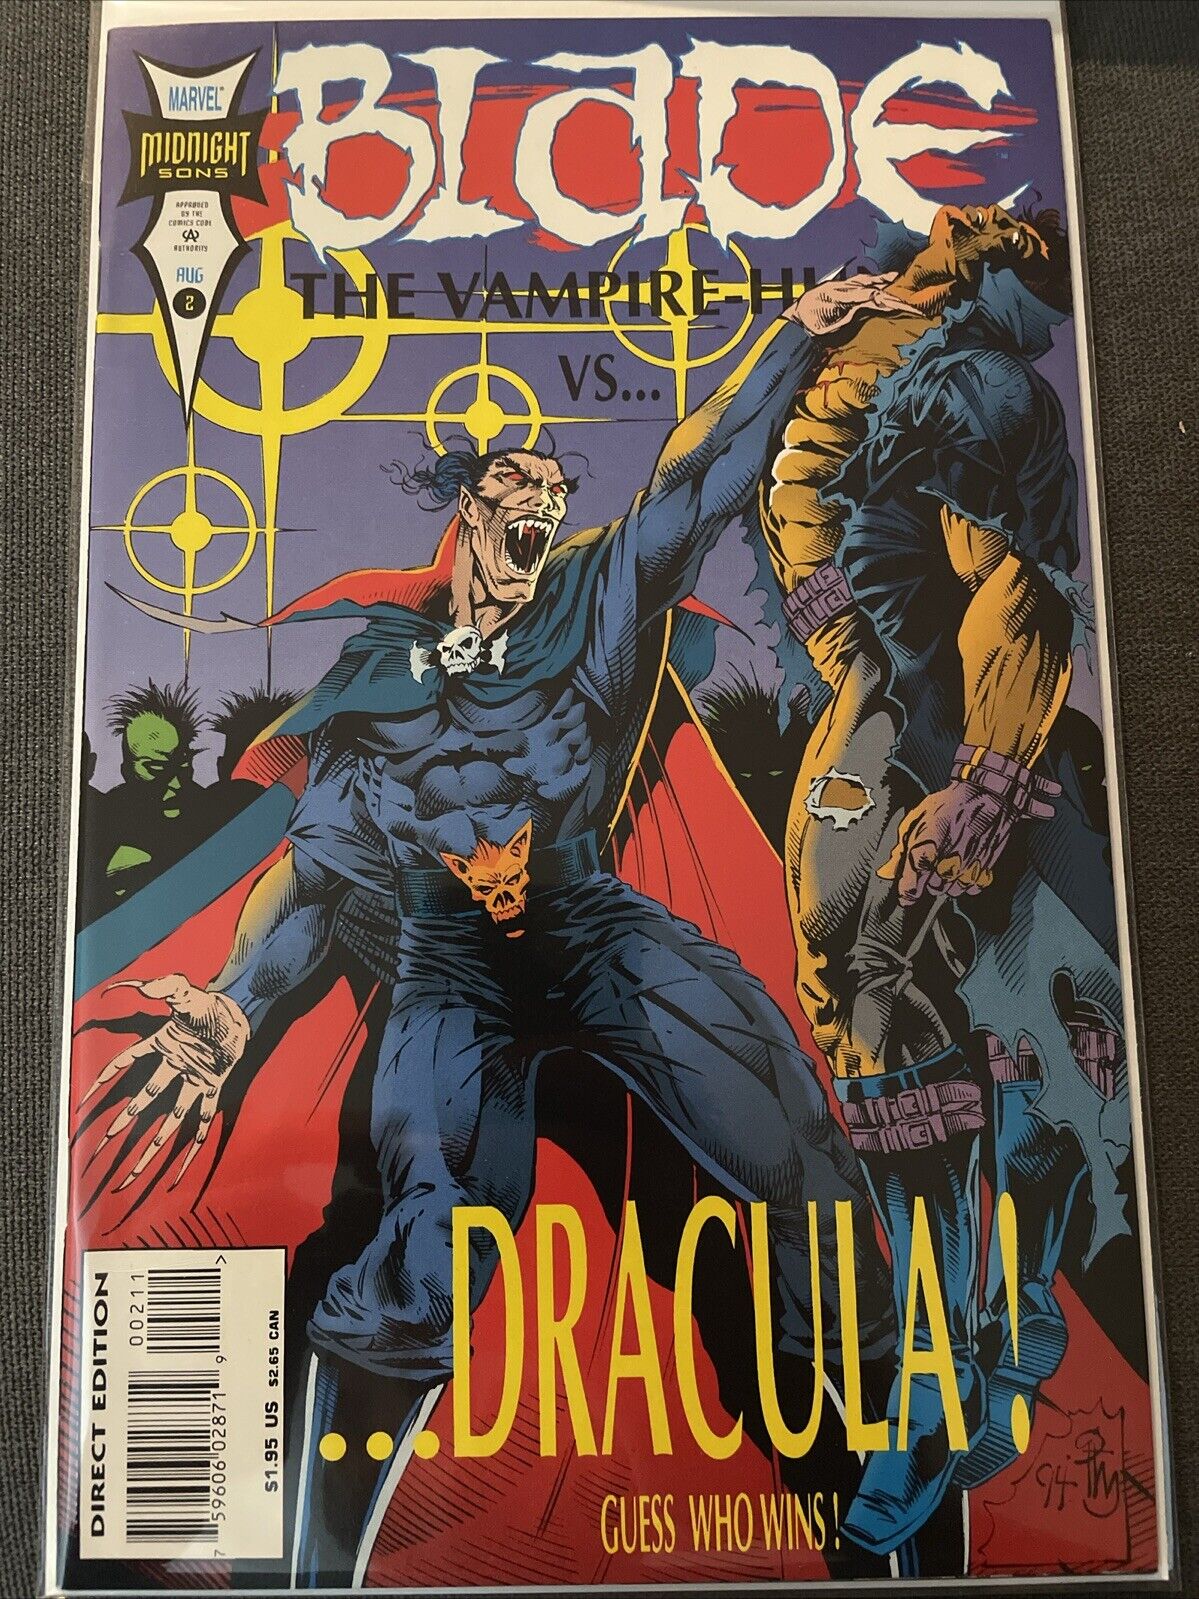 Marvel - BLADE: THE VAMPIRE HUNTER #2 (Great Condition) bagged and boarded